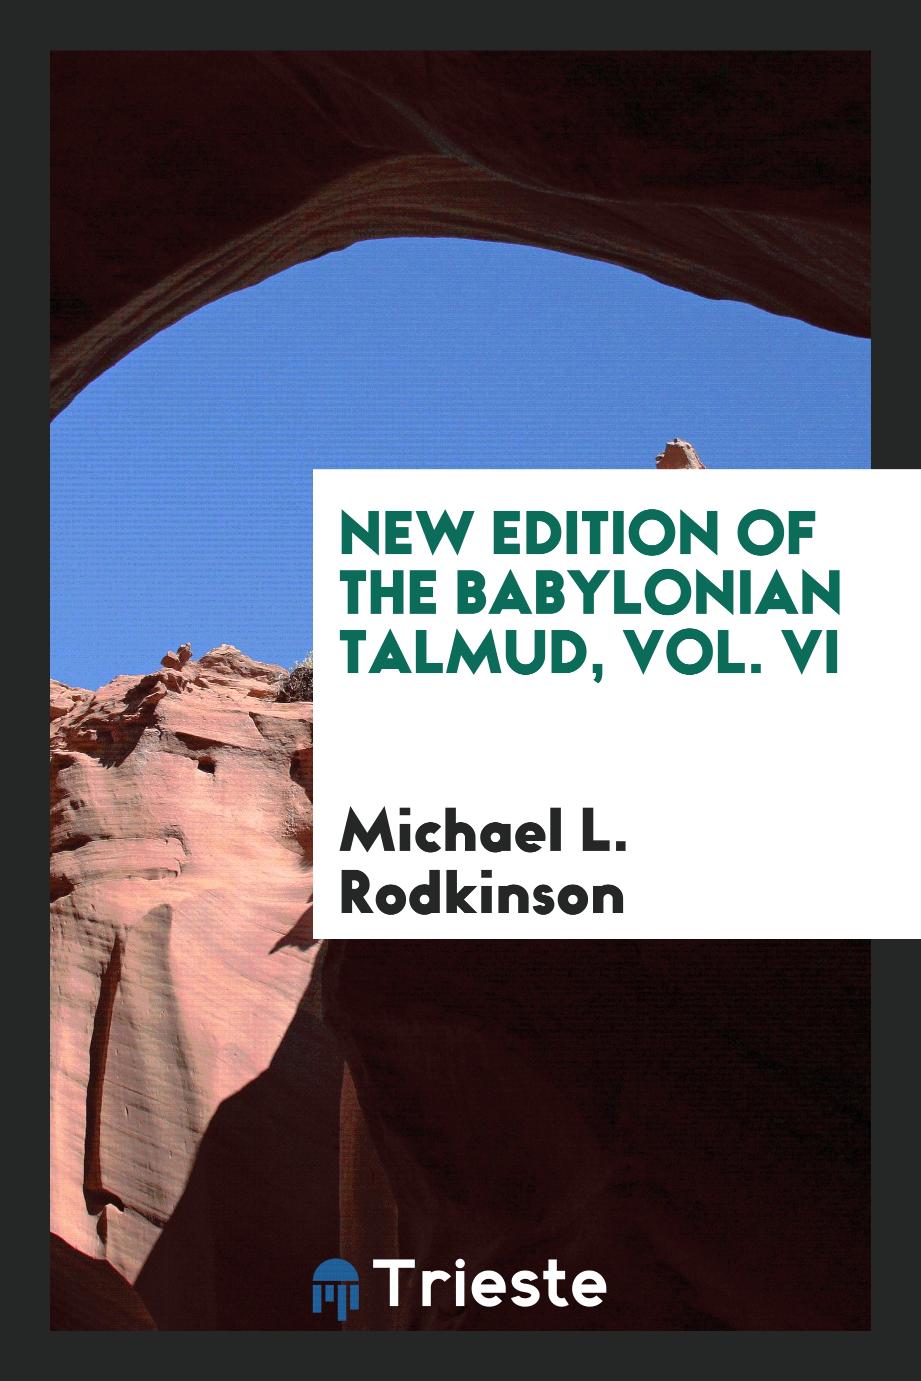 New Edition of the Babylonian Talmud, Vol. VI